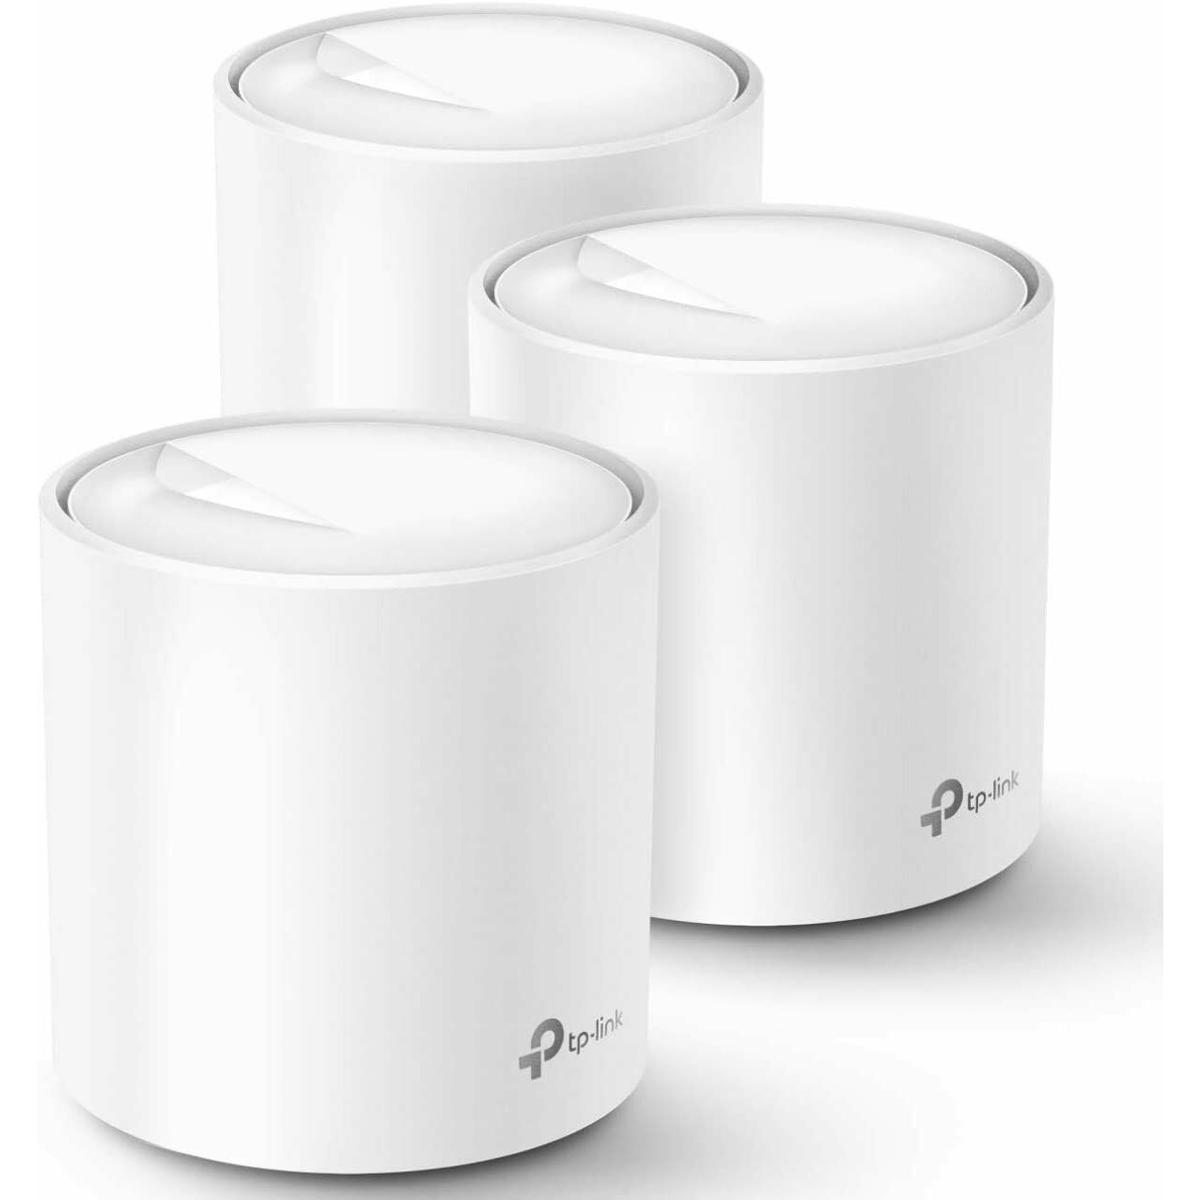 3 TP-Link Deco WiFi 6 Mesh WiFi System for $137.69 Shipped